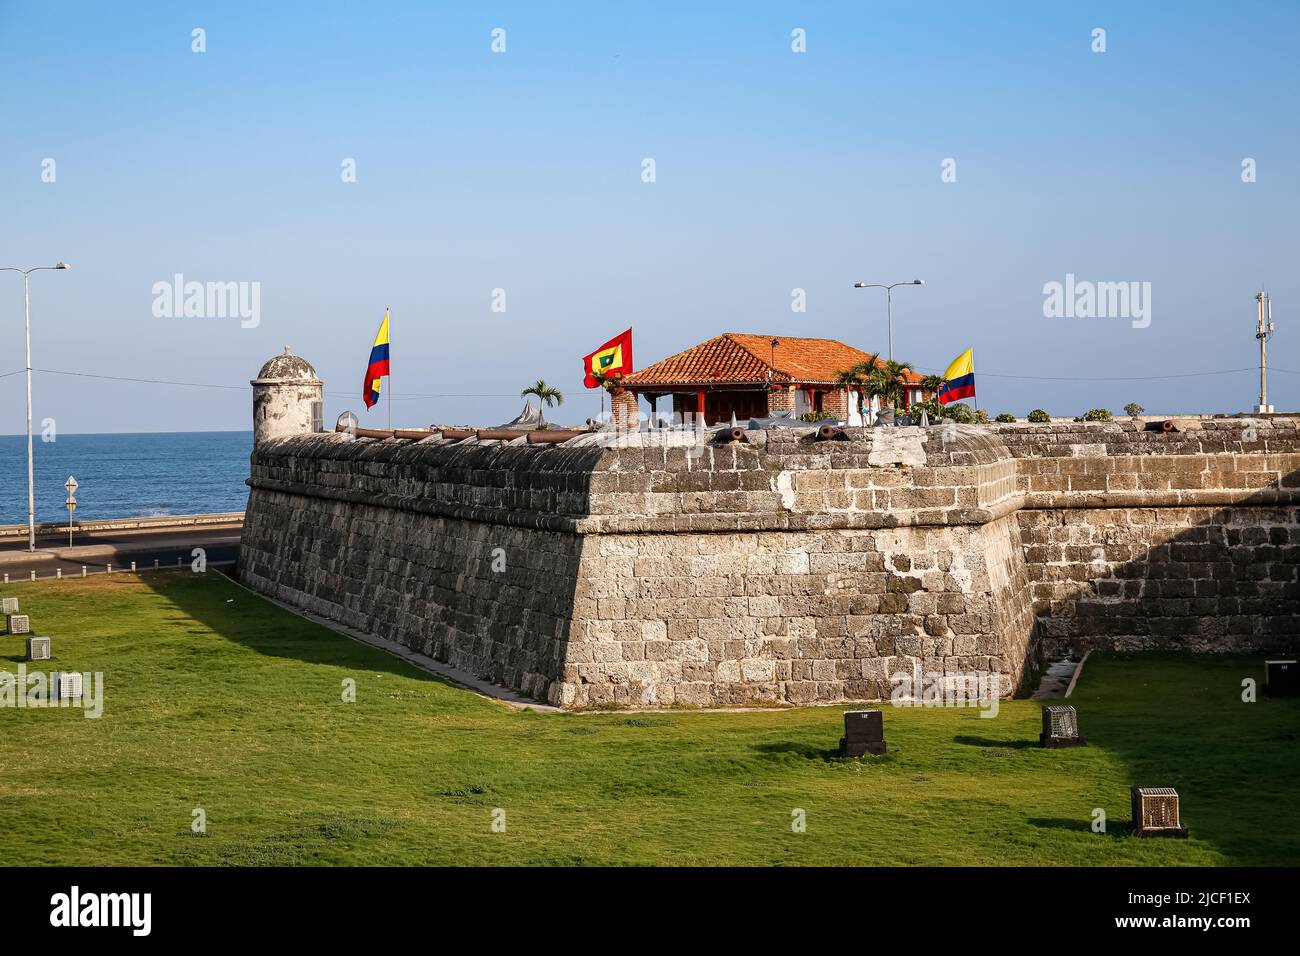 View to a bastion of the city wall with blue sky and see in background, Cartagena, Colombia, Unesco World Heritage Stock Photo